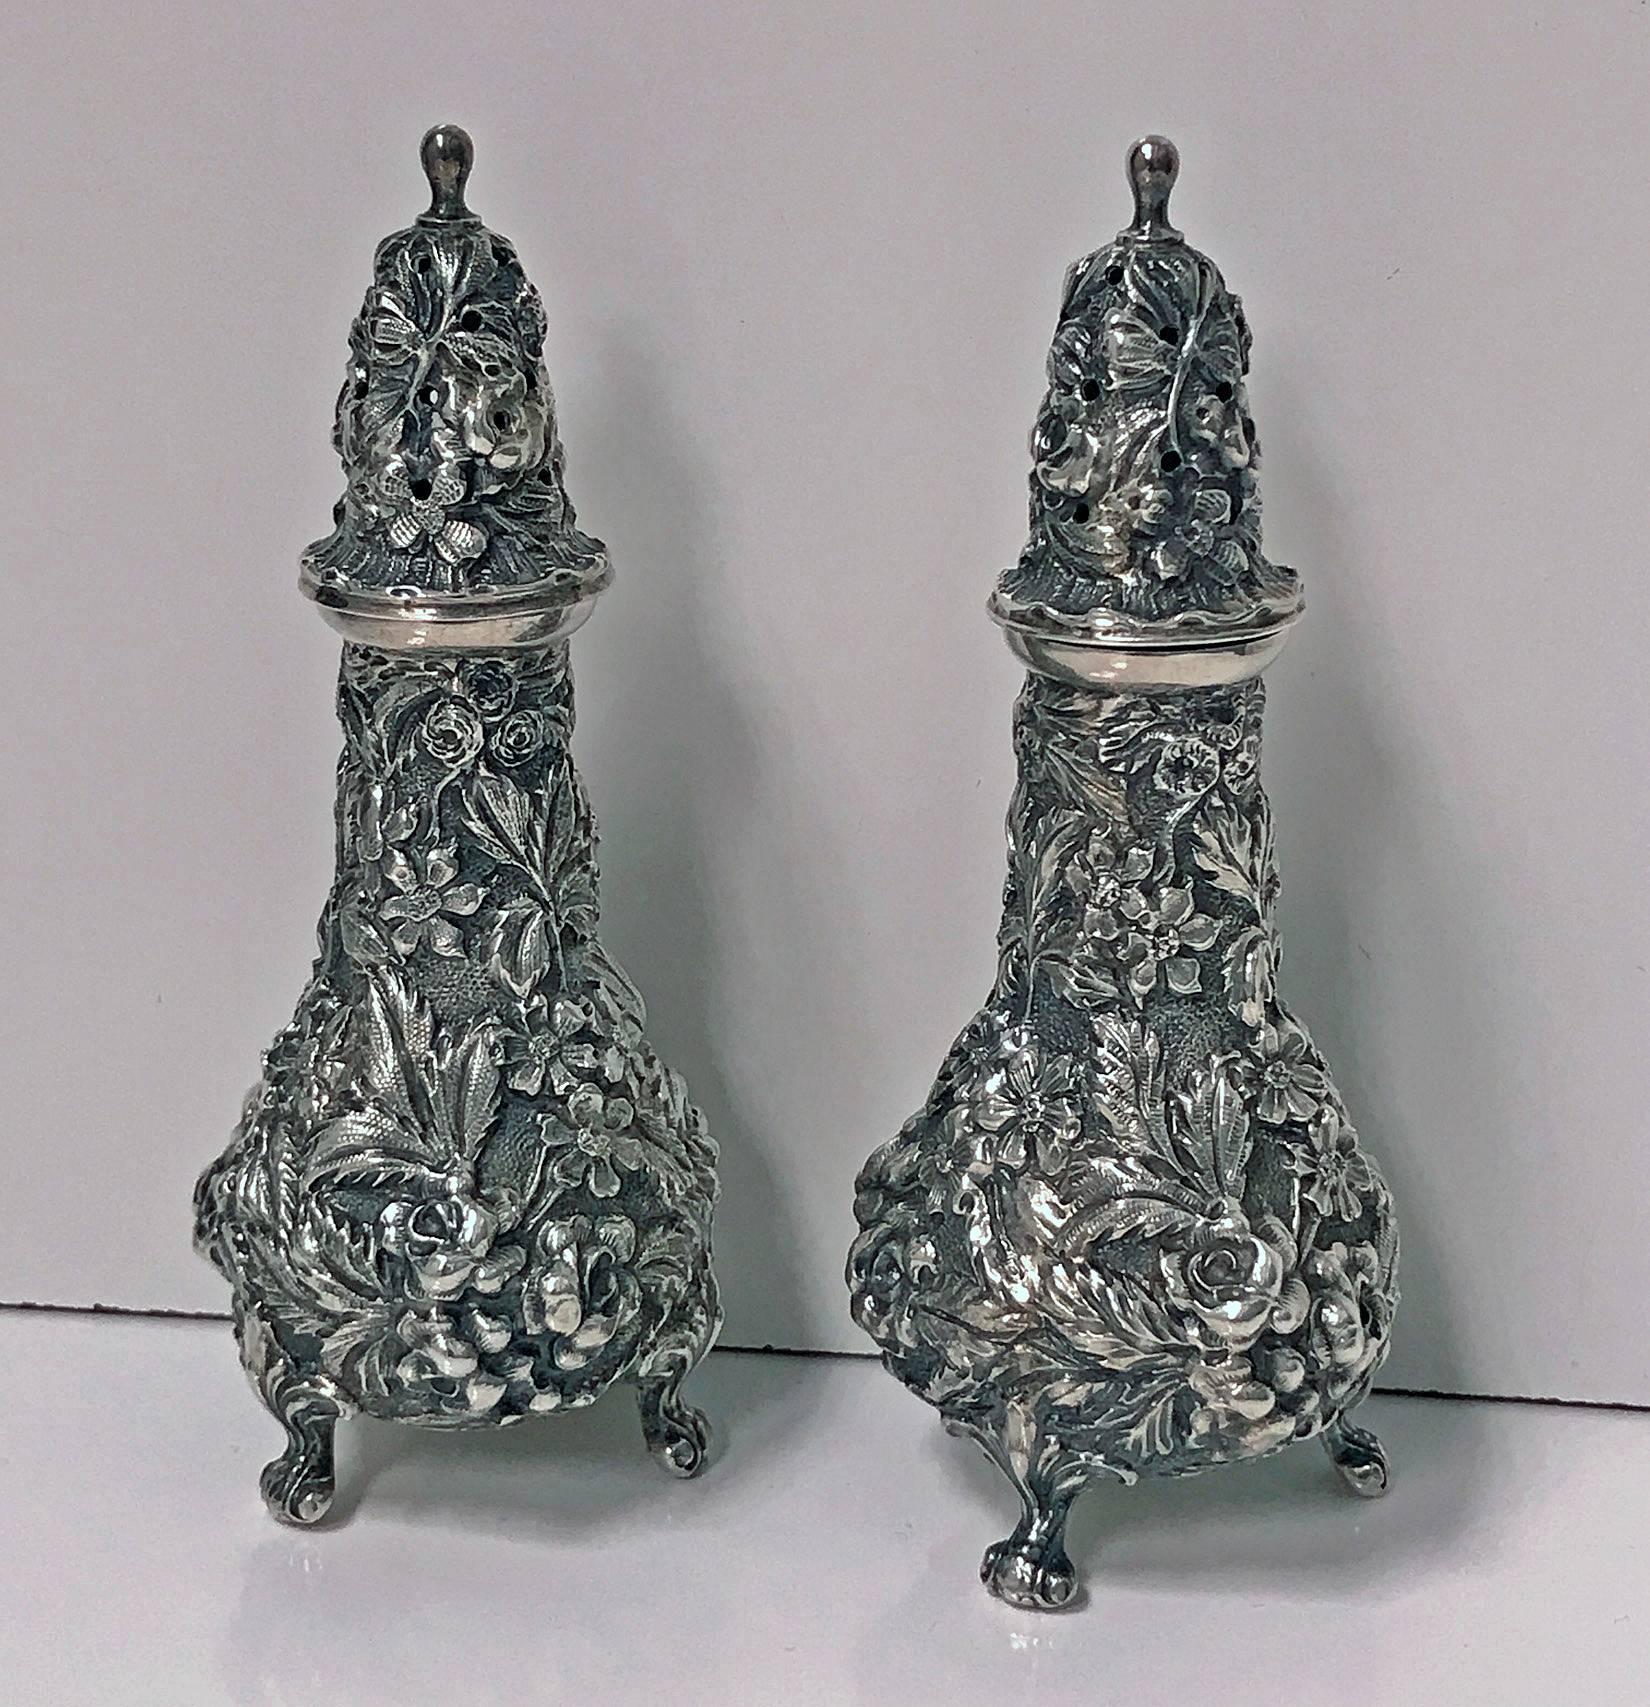 Pair of Stieff sterling silver rose repoussé casters, fully marked and date letter for 1915. Measure: height 4.5 inches. Weight 120.18 grams.